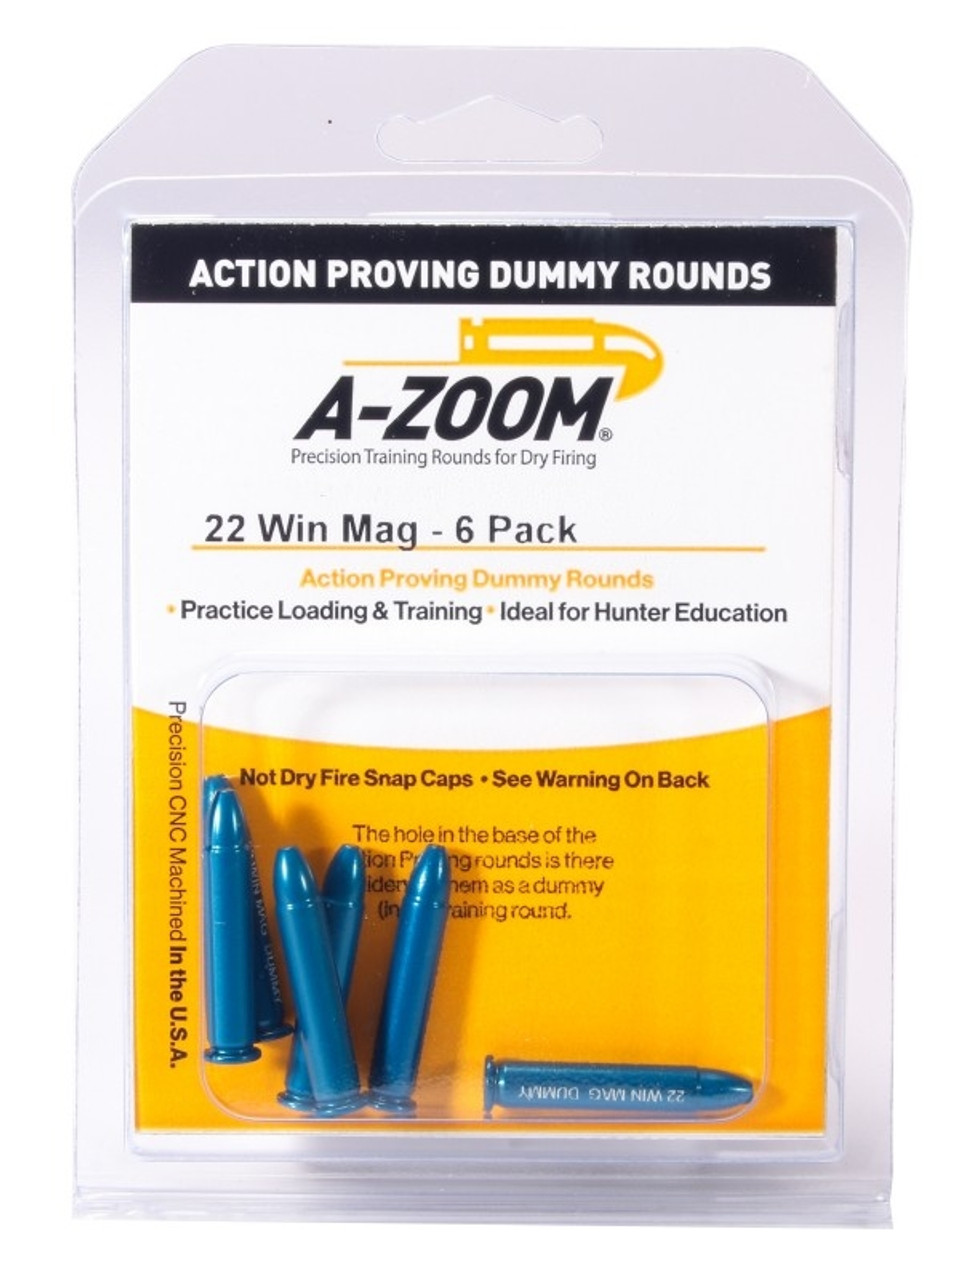 A-ZOOM®
For safety training, function testing or safely decocking without damaging the firing pin, A-Zoom training rounds are much more than conventional snap-caps. They are precision CNC machined from solid aluminum to precise cartridge dimensions, then hard anodized for ultra-smooth functioning and long life.Each round has A-Zoom’s remarkably durable Dead Cap proven to withstand over three thousand dry fires while protecting the firing pin. A-Zoom Snap Caps last over 30 times longer than conventional plastic examples and are available in over 120 sizes from .22 Hornet to the .50BMG. From 9MM snap caps for your Luger pistol to A-Zoom Rifle Snap Caps – shop Lyman for our safe firing practice rounds.